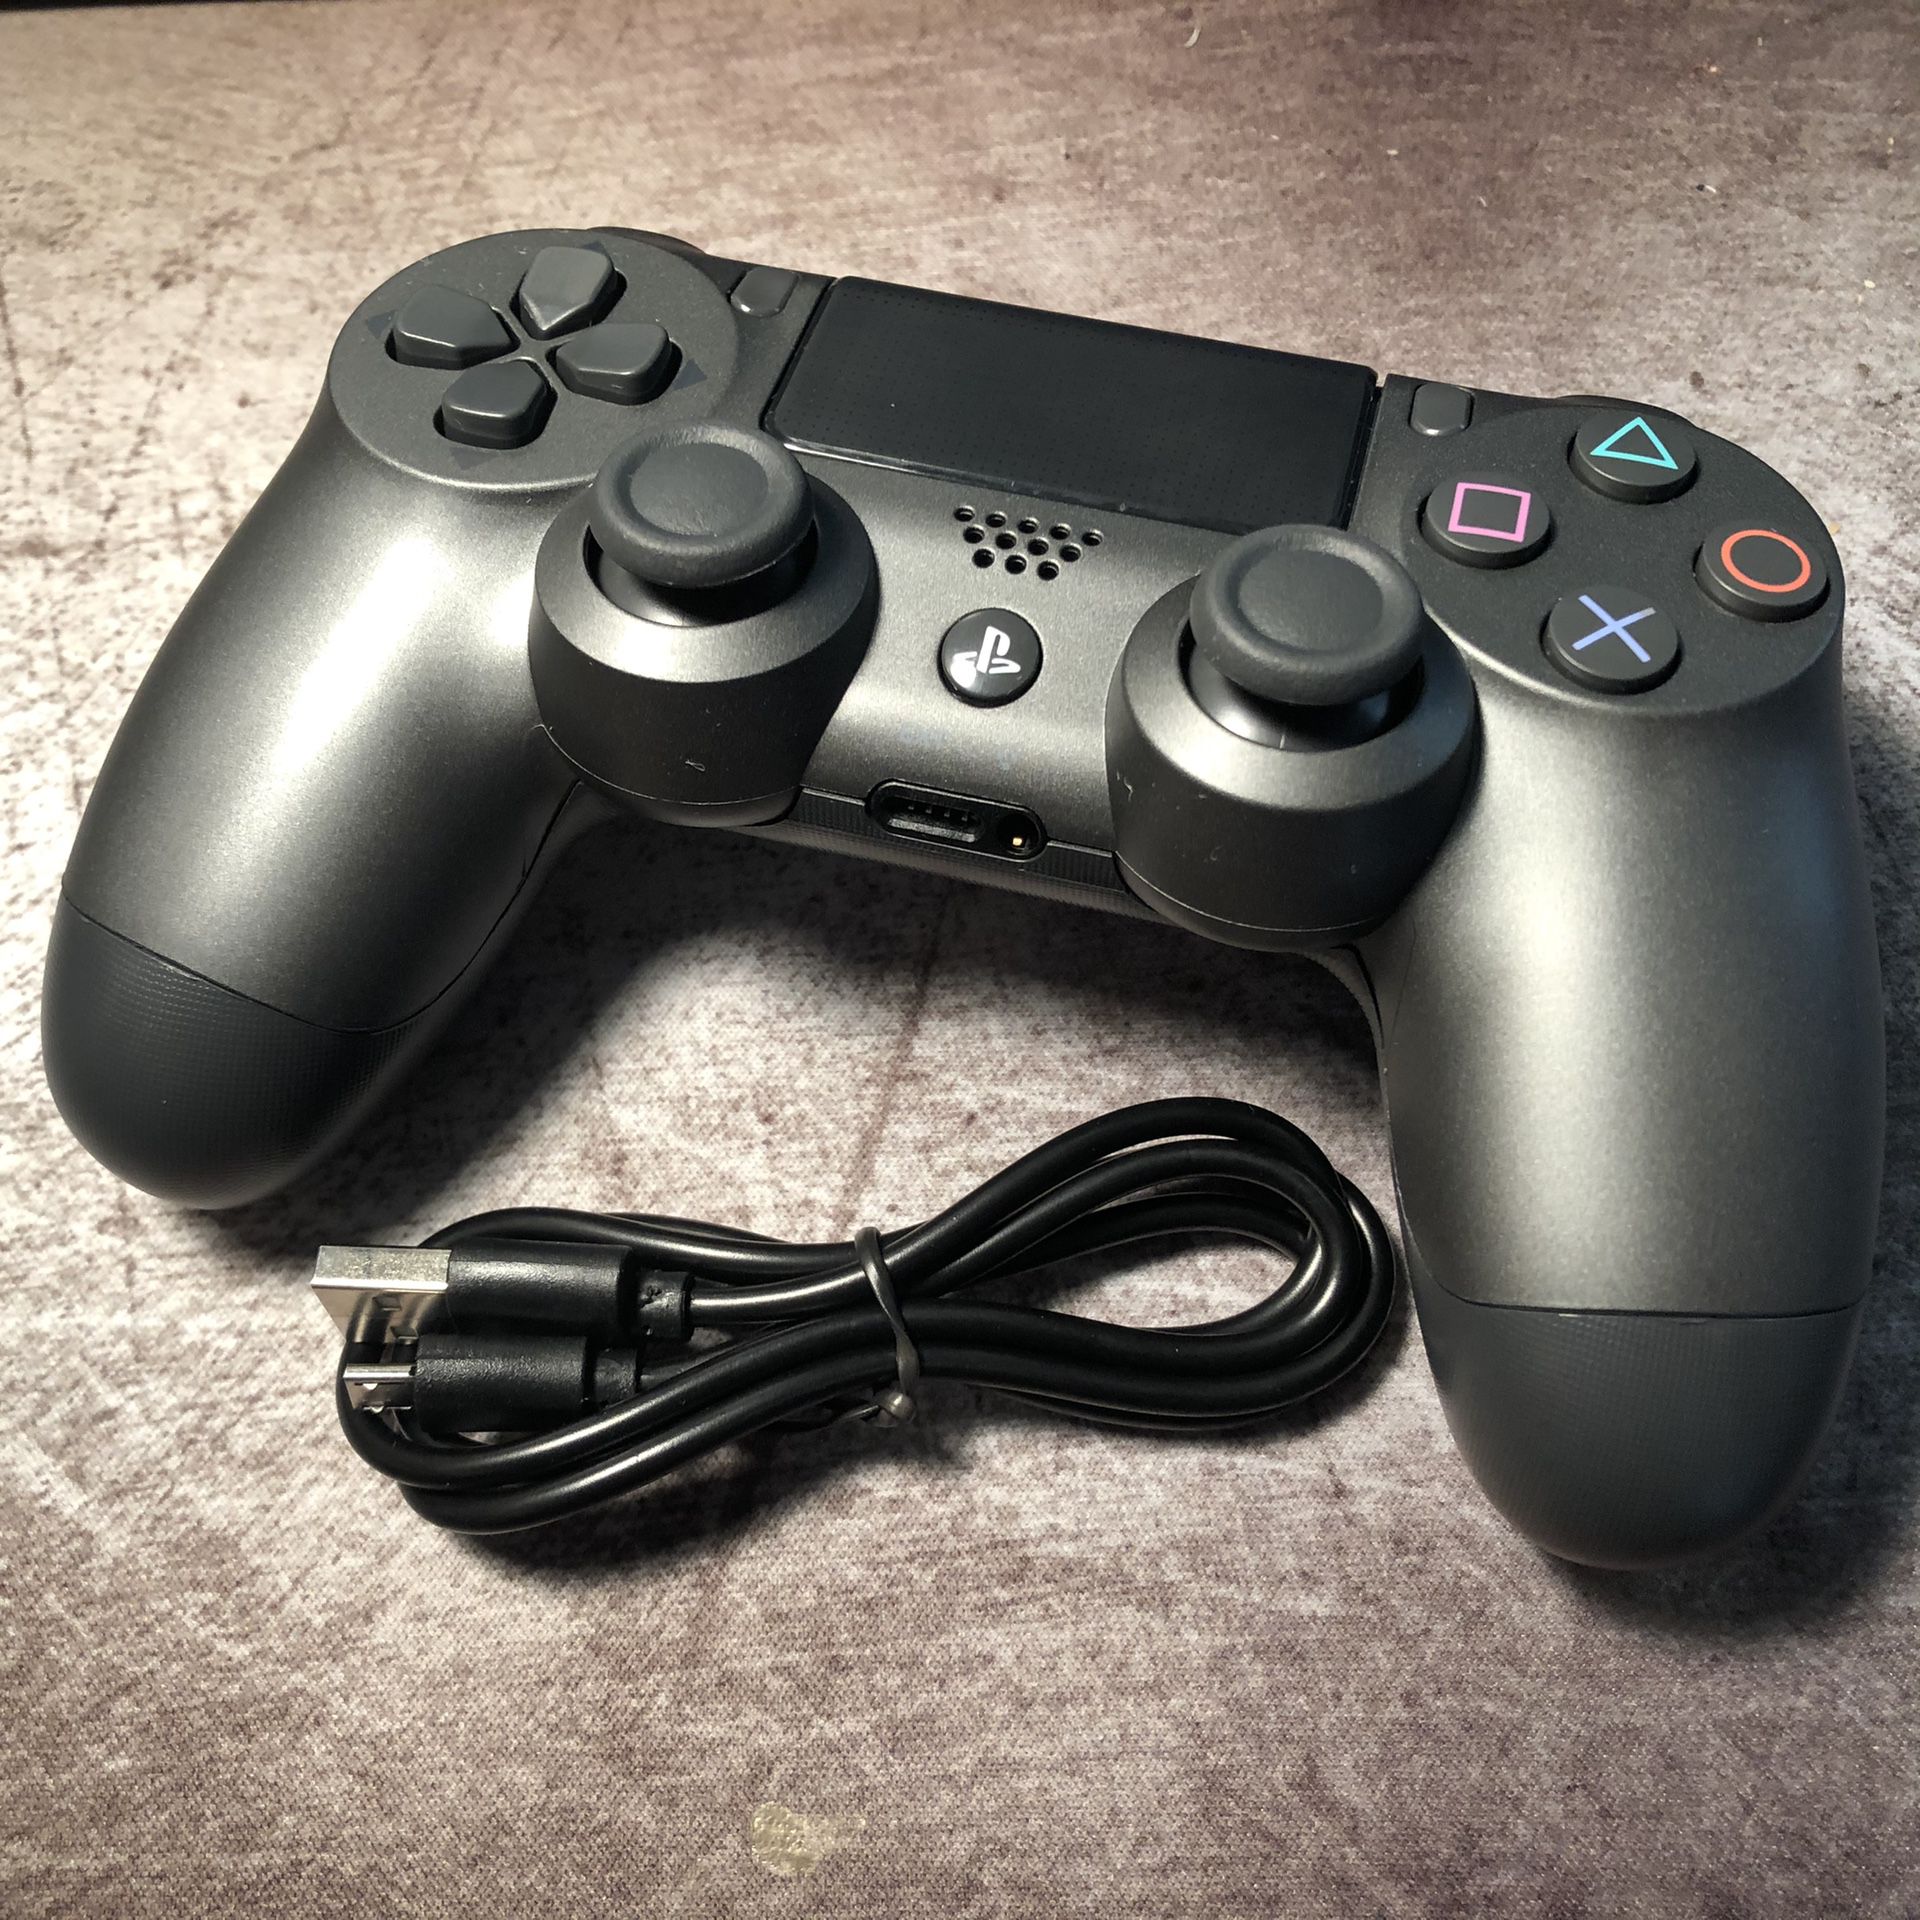 Steel grey PS4 controller - like new